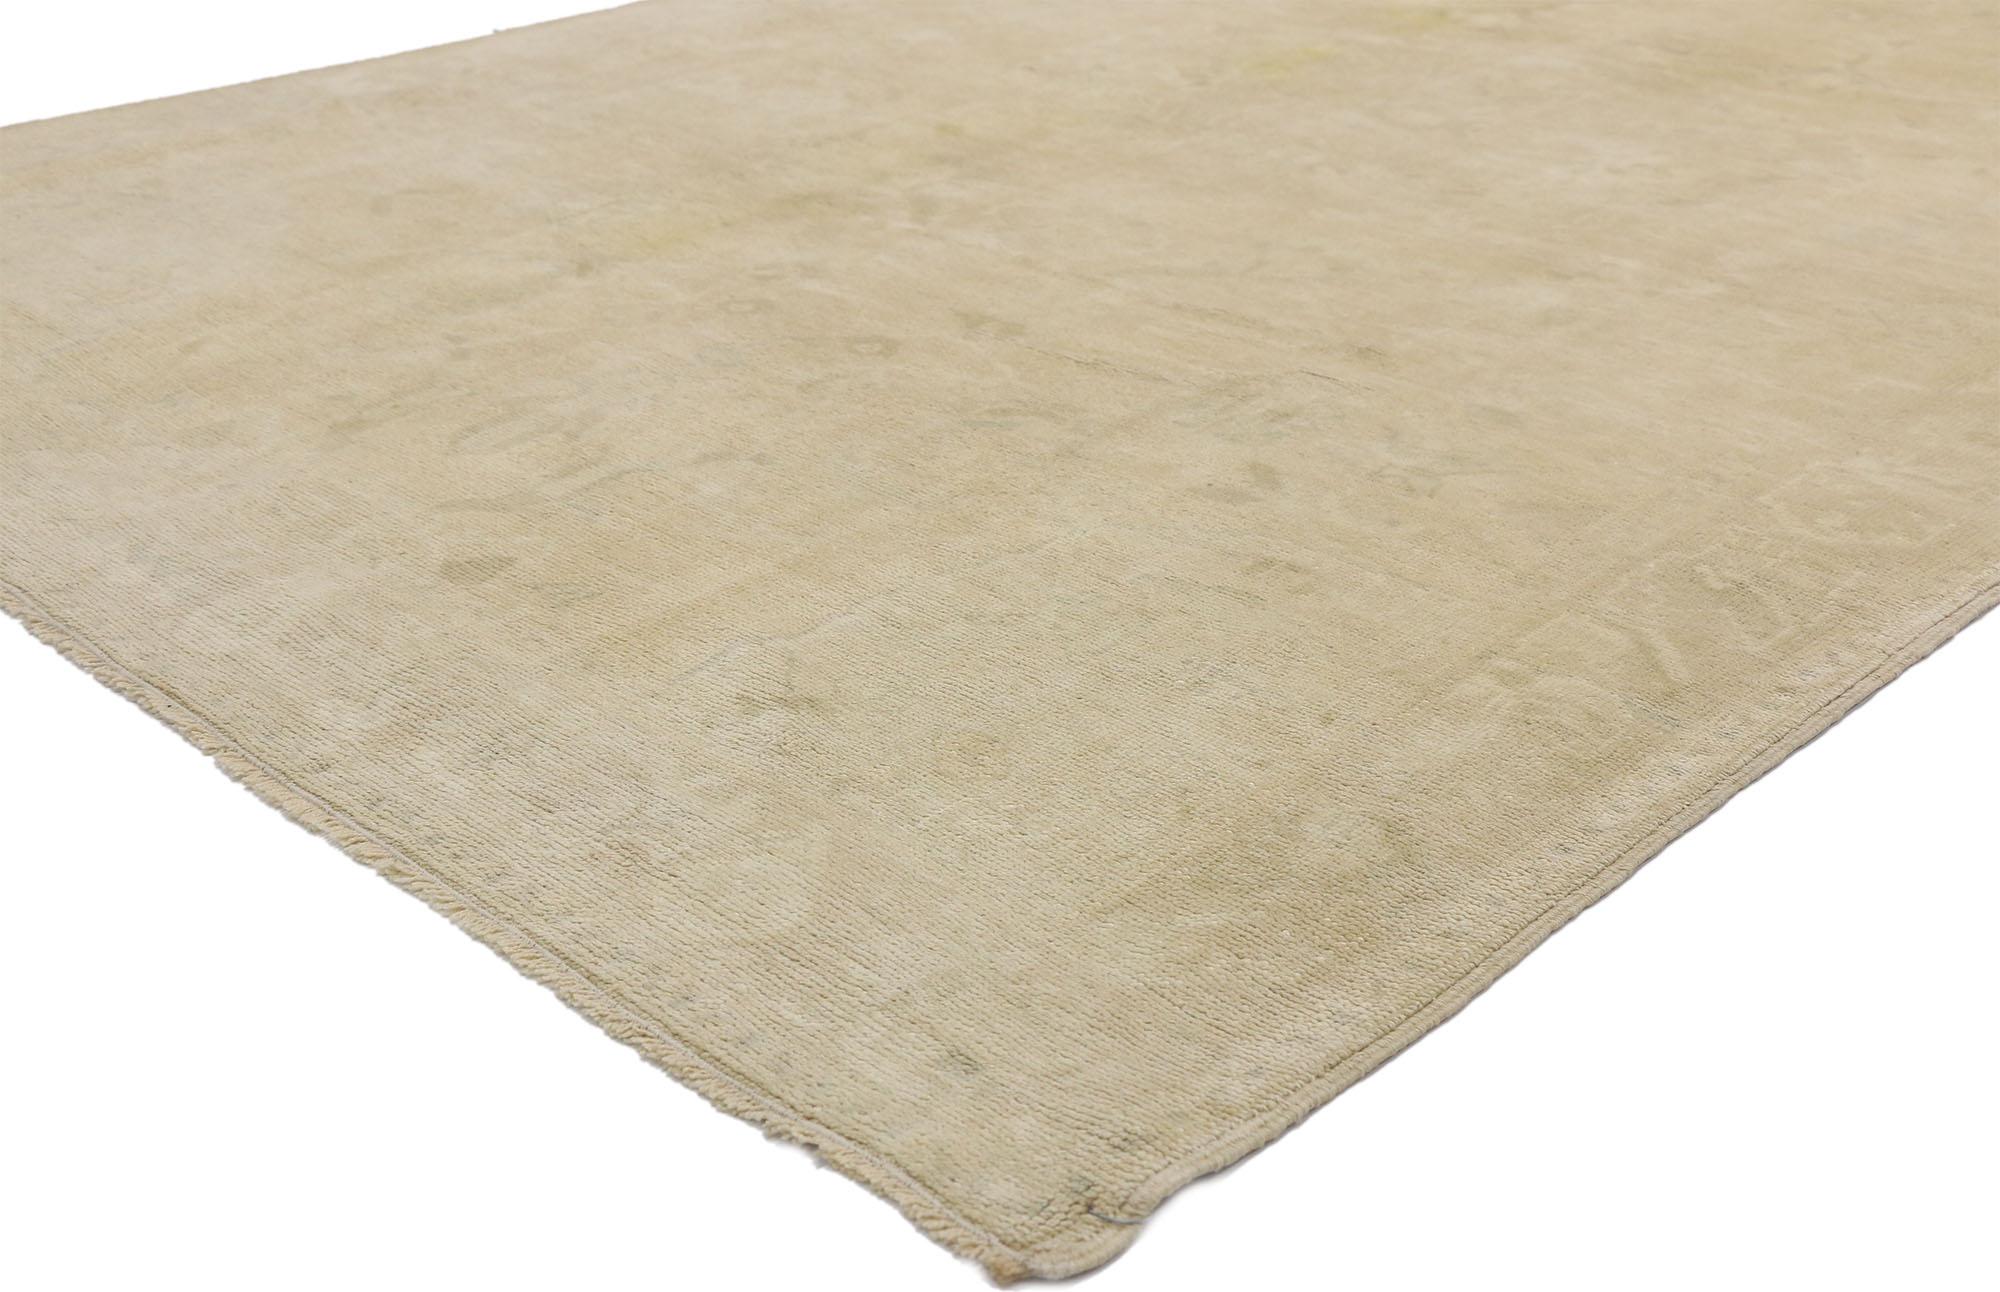 52500, vintage Turkish Oushak rug with monochromatic Mission style with neutral tones. This hand knotted wool vintage Turkish Oushak rug features a subtle all-over pattern in neutral tones. Warm and inviting combined with delicate and docile